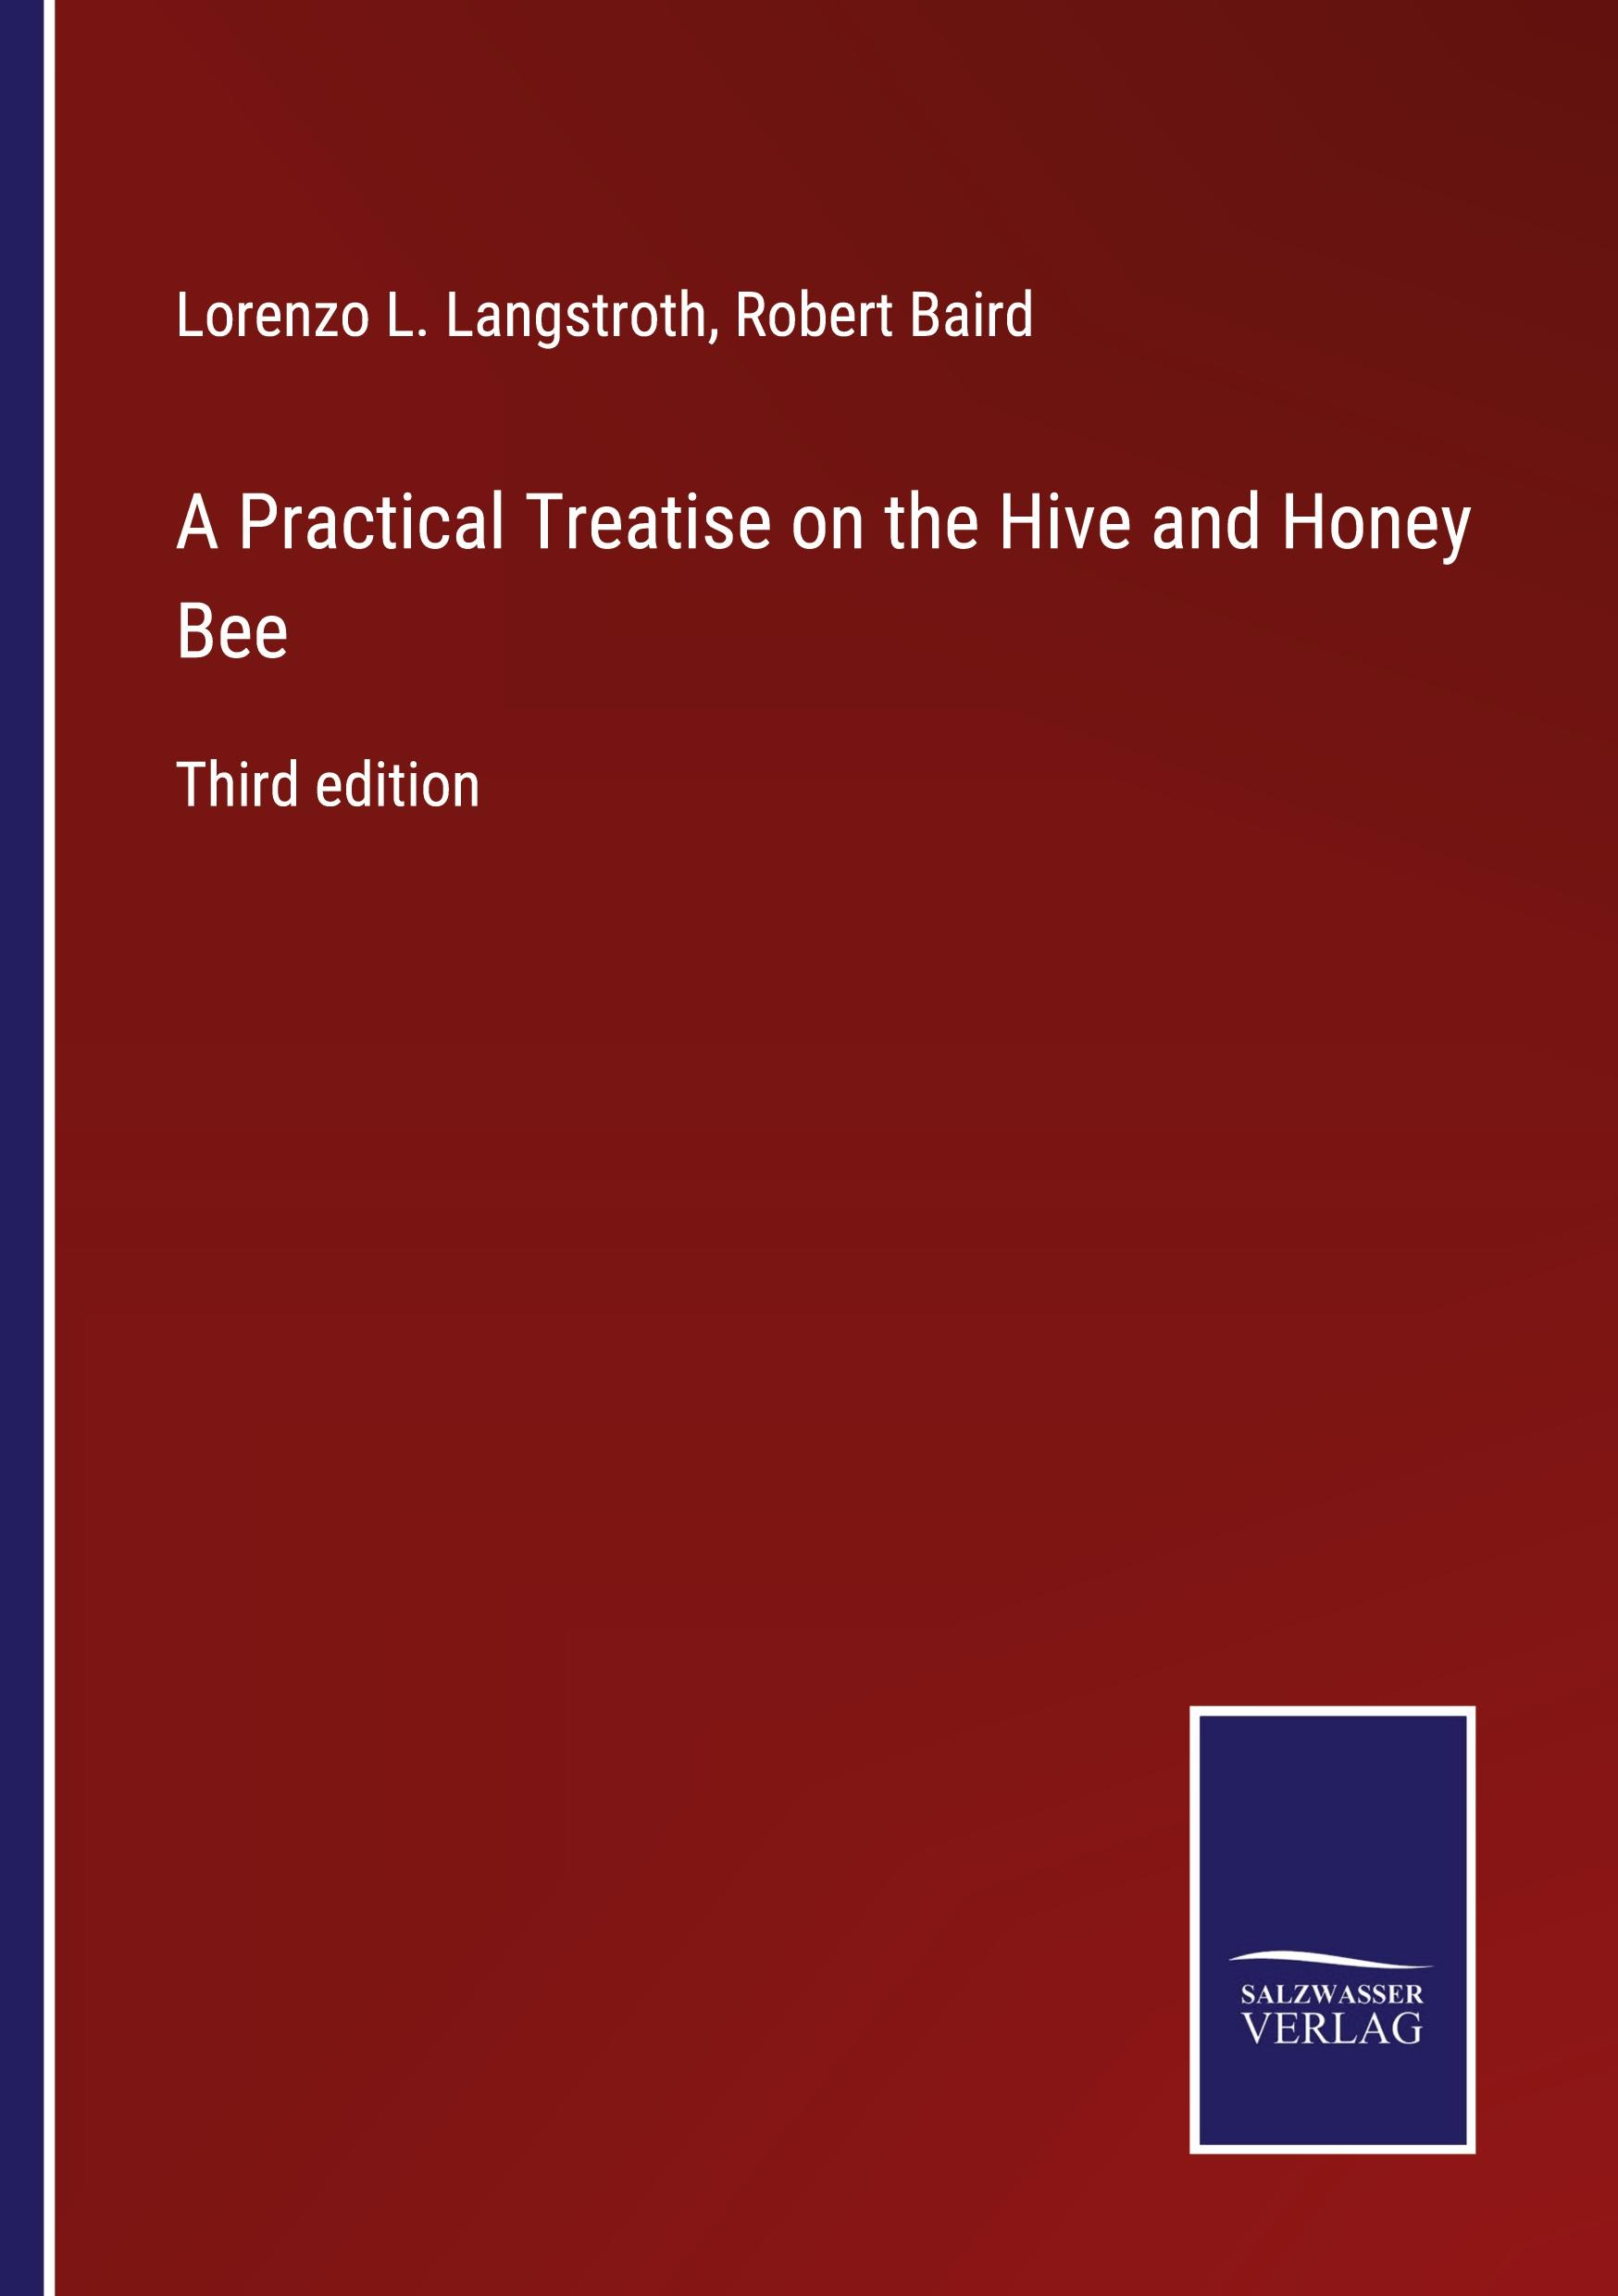 A Practical Treatise on the Hive and Honey Bee